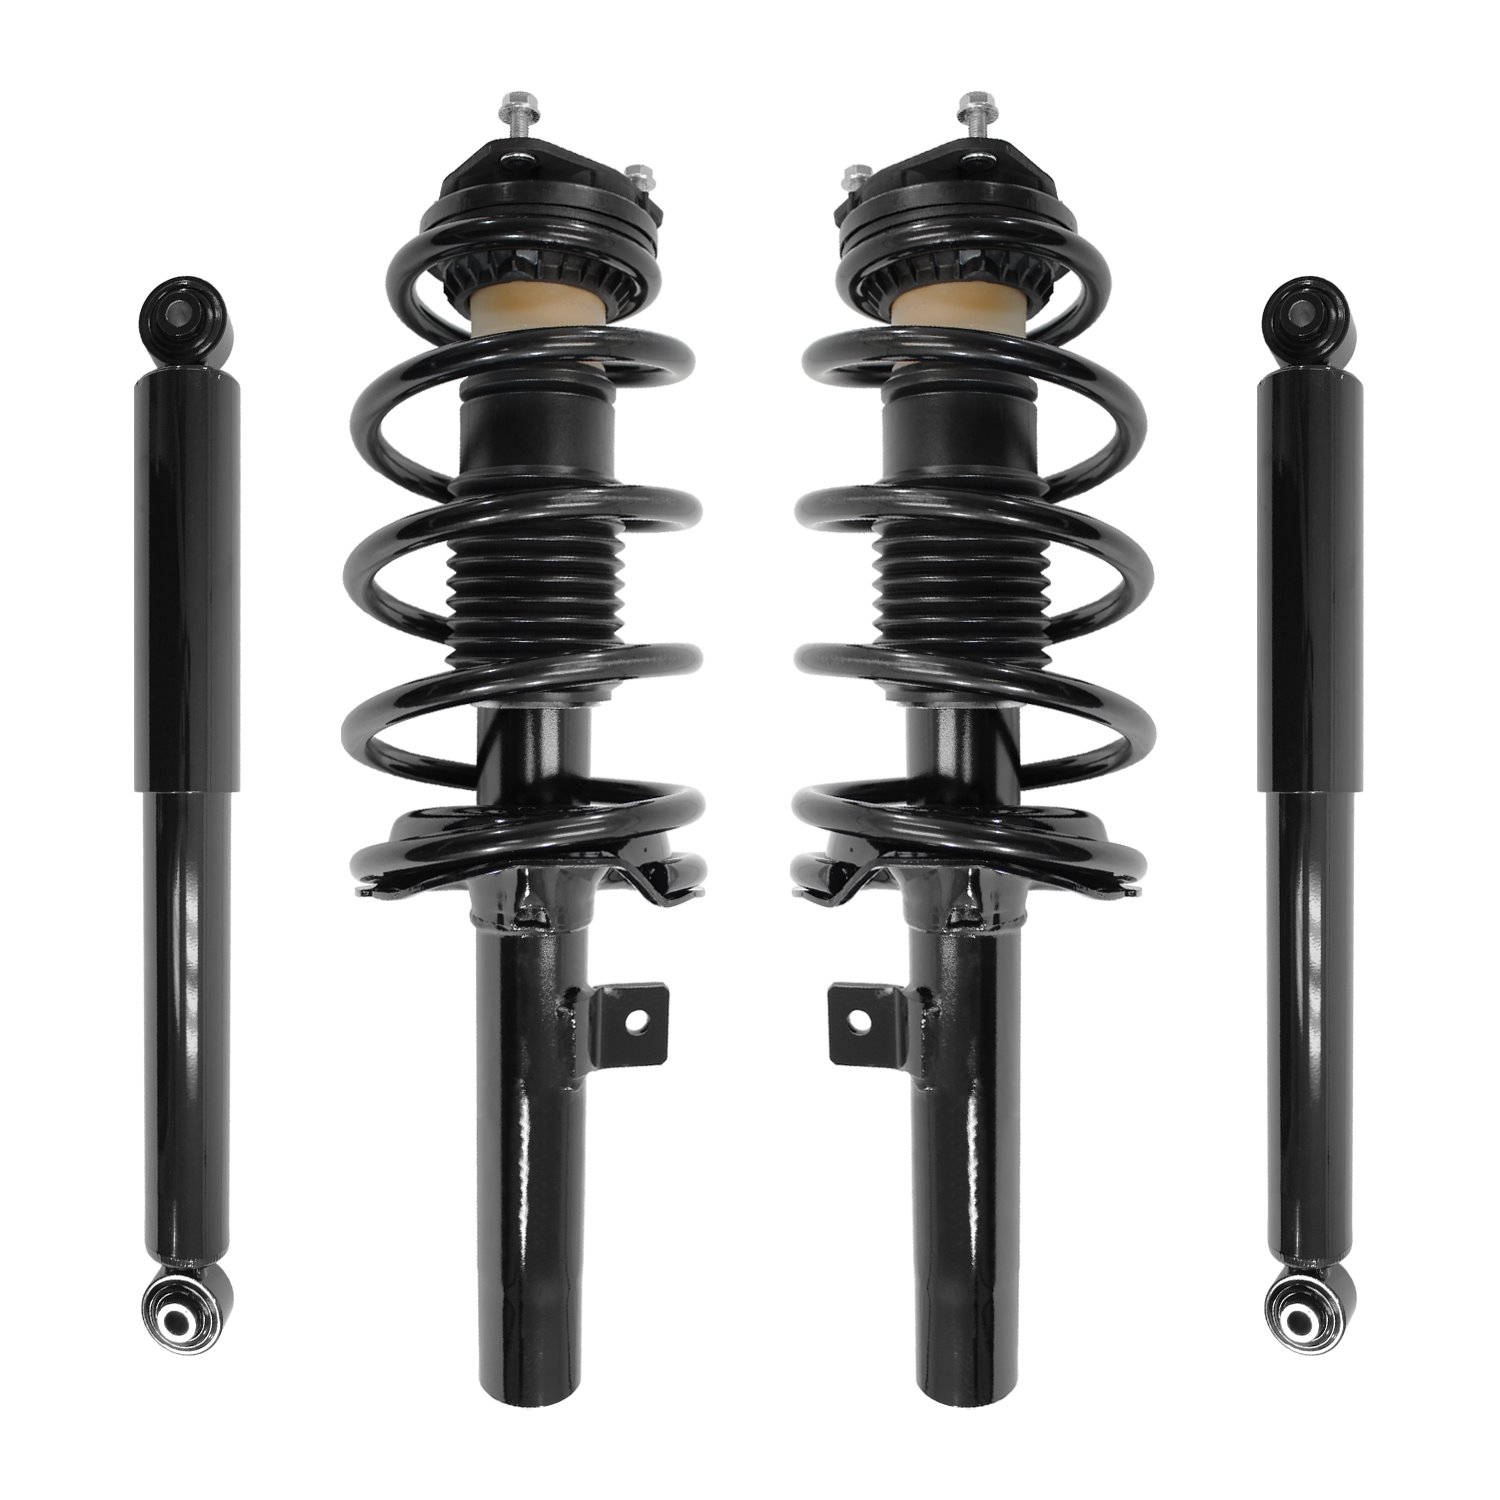 4-13213-252230-001 Front & Rear Suspension Strut & Coil Spring Assembly Fits Select Ford Transit Connect